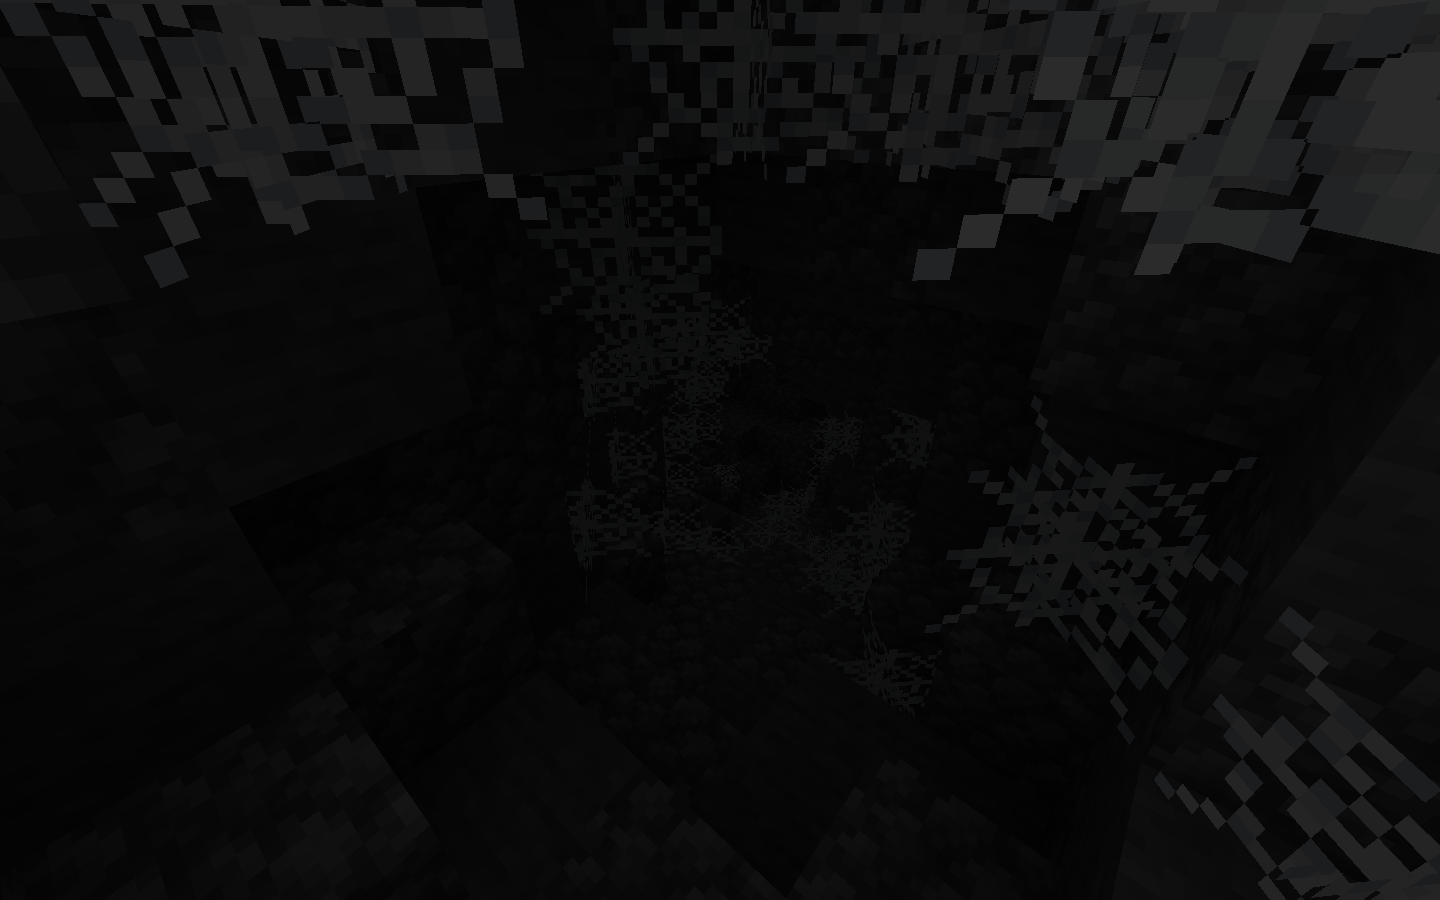 Spider caves